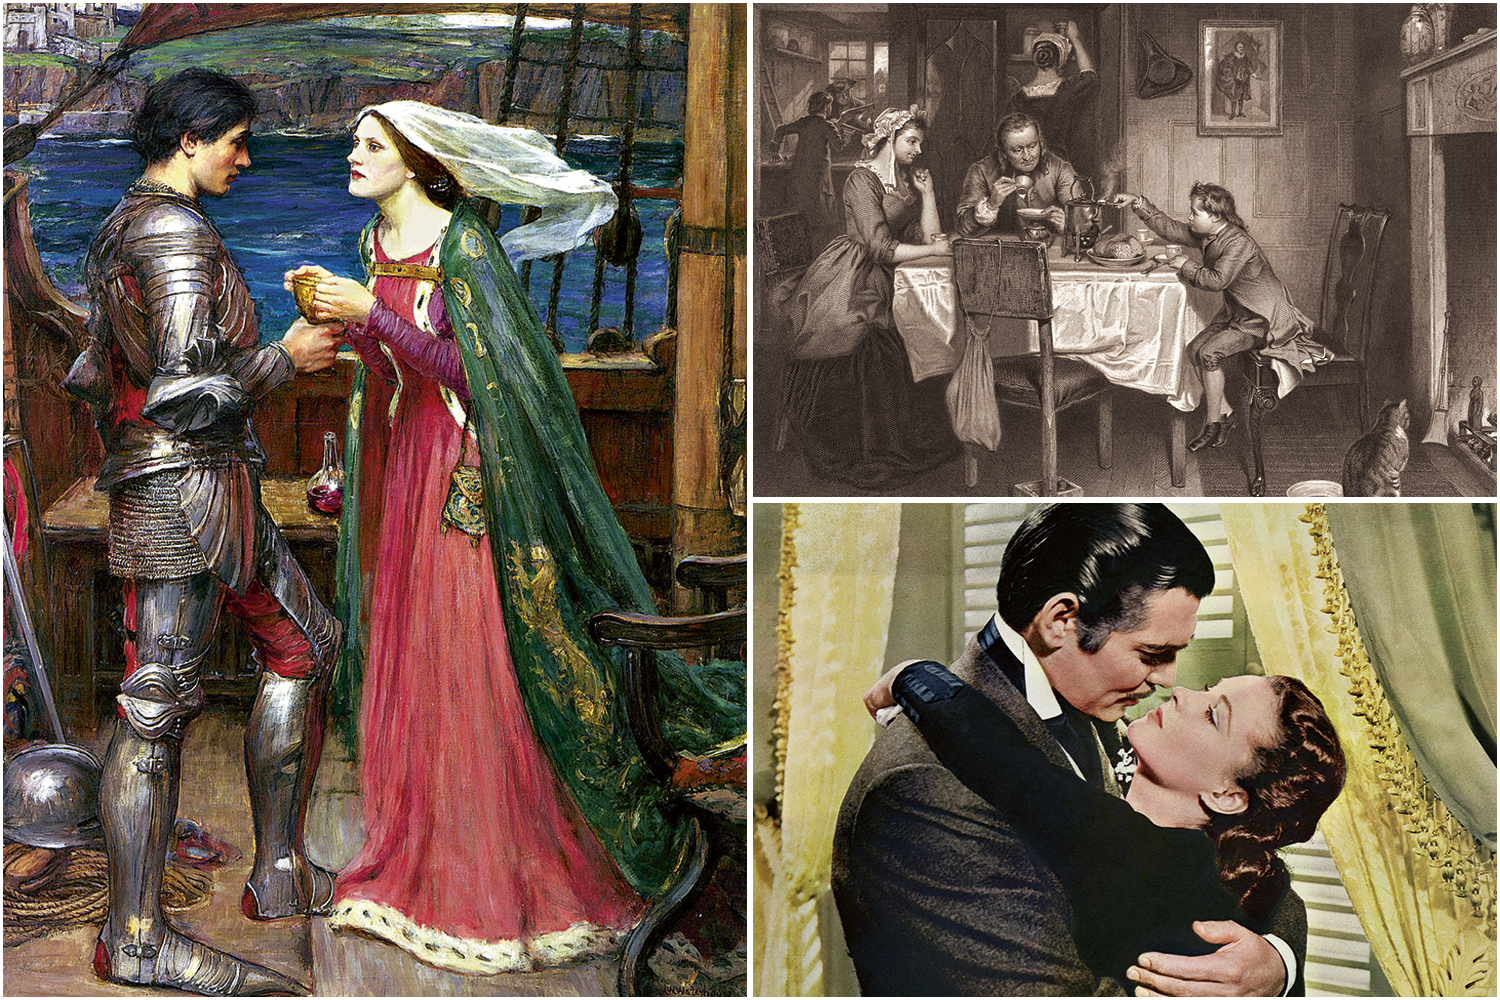 GOODBYE, Sighs - The heights of romance in Tristan and Isolde (left) 19th century romance (top right) and Hollywood romance: classic ideals -